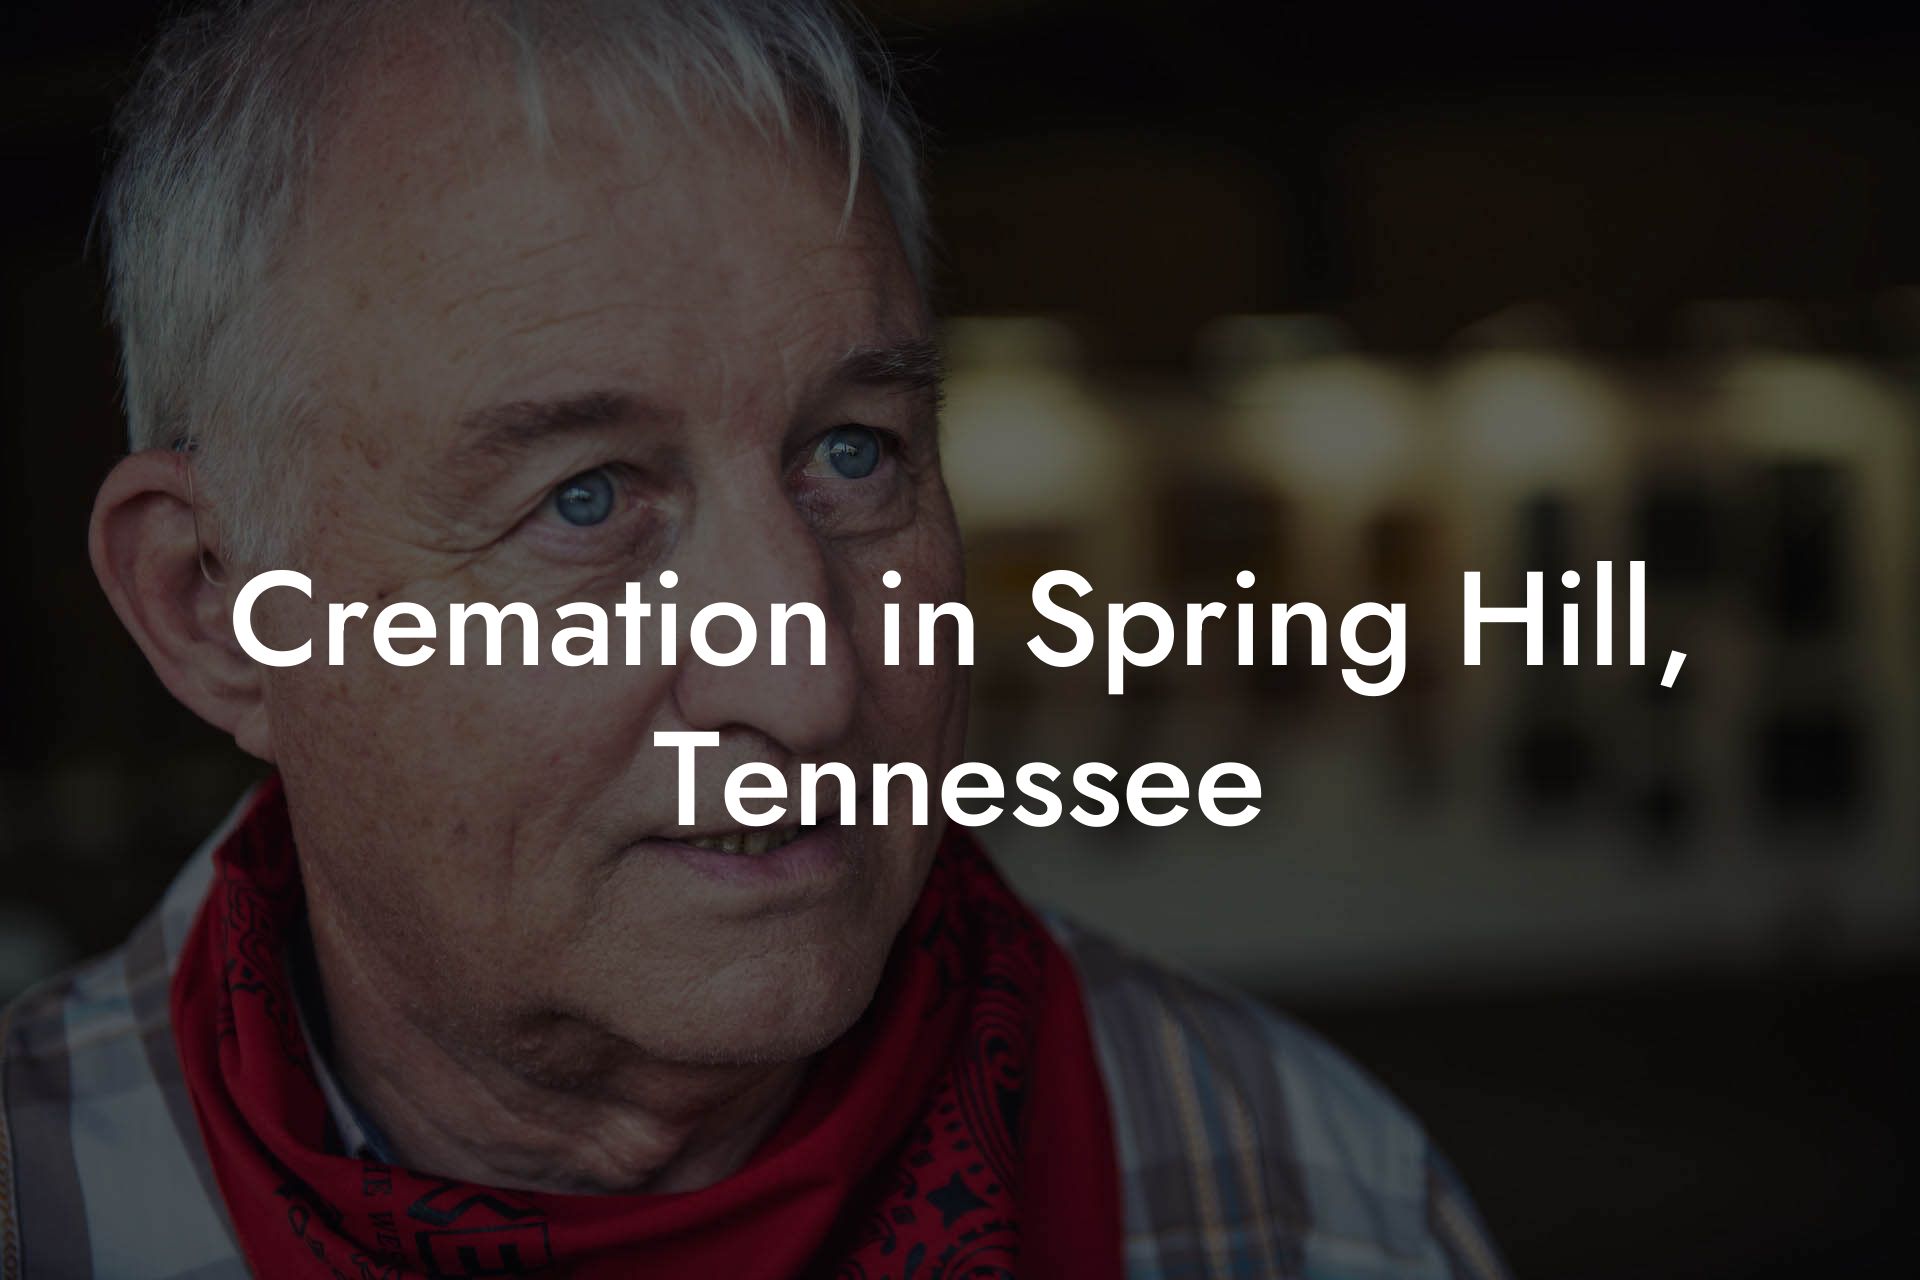 Cremation in Spring Hill, Tennessee